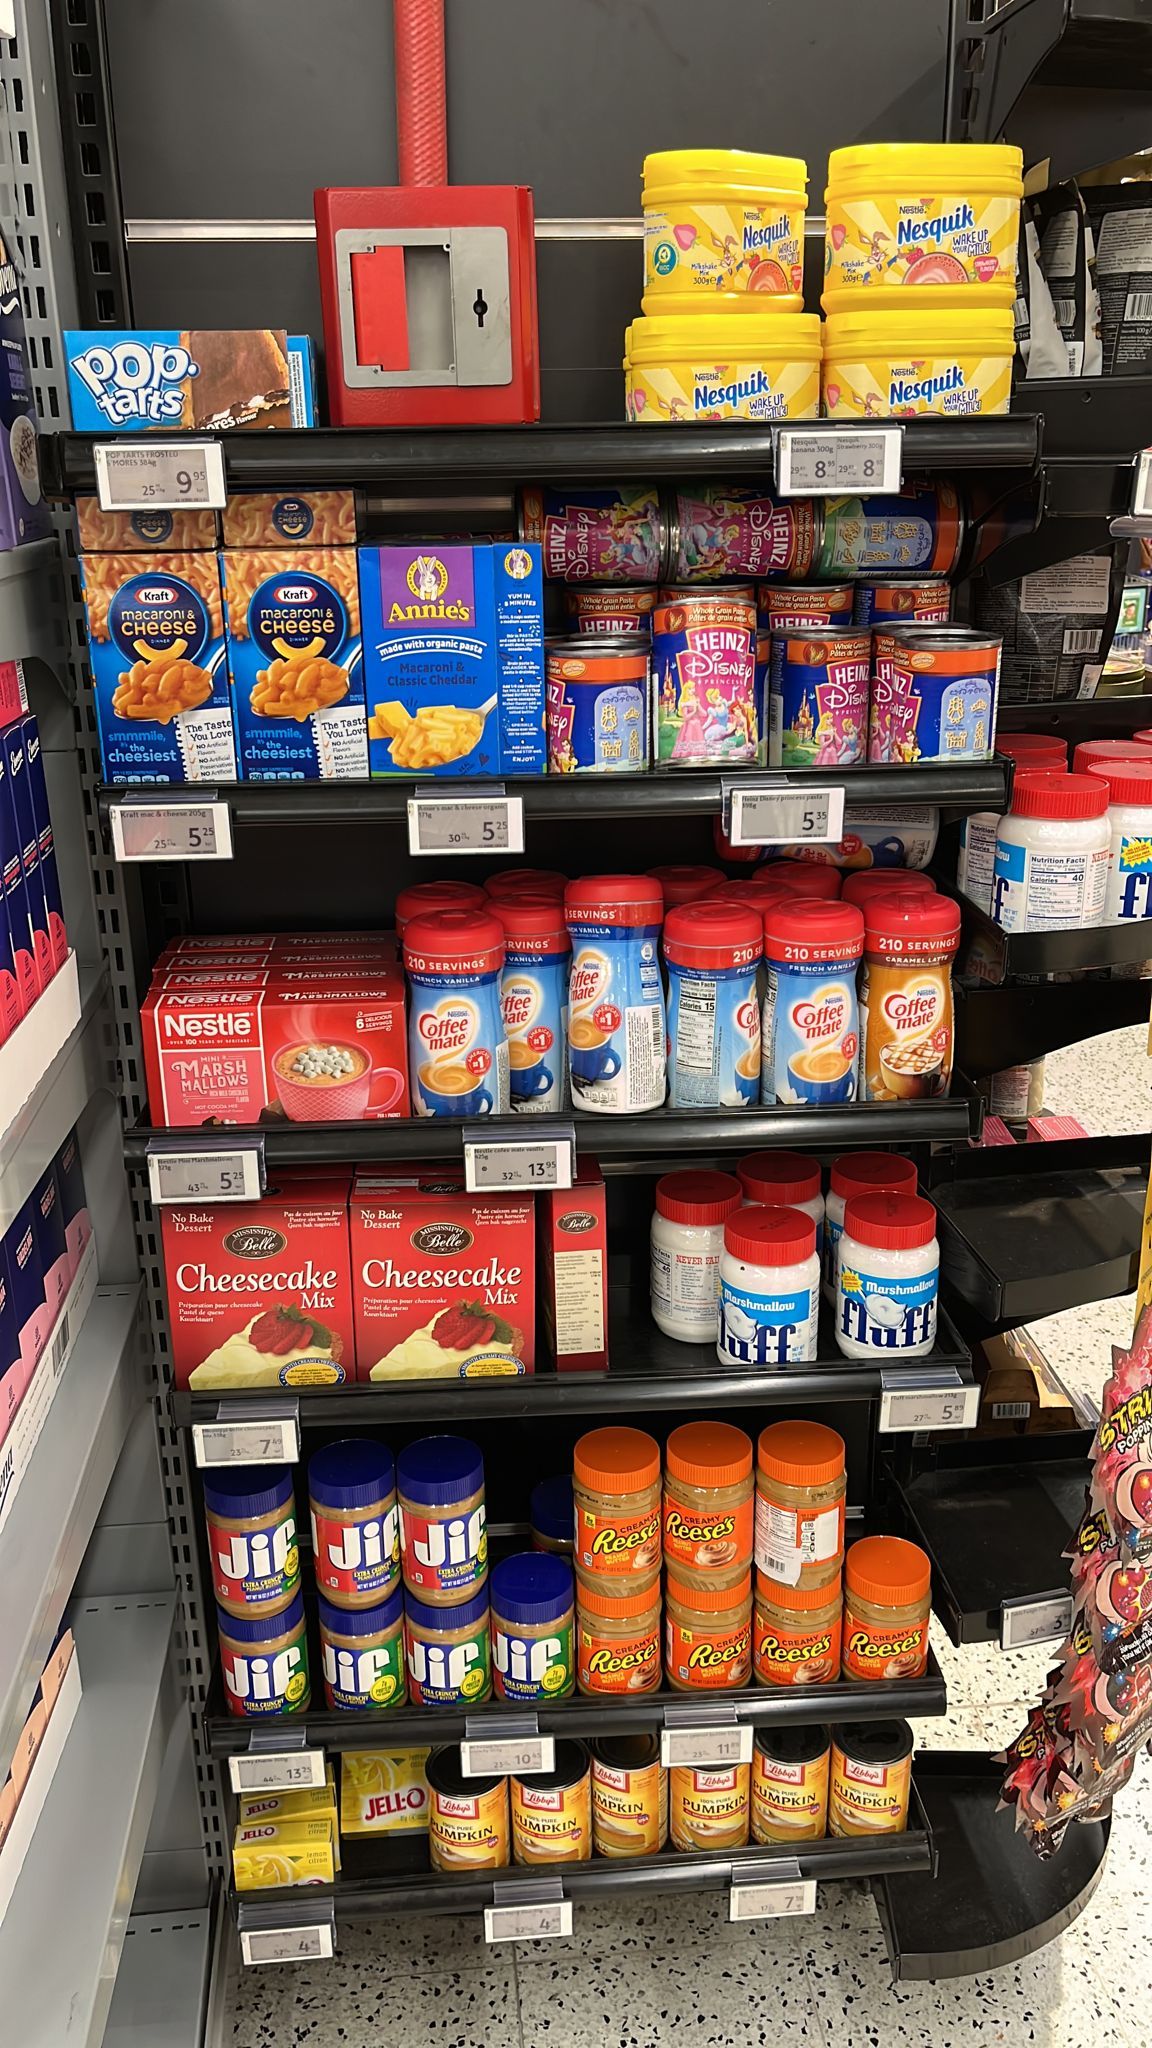 The "exotic" section of a grocery store in Finland